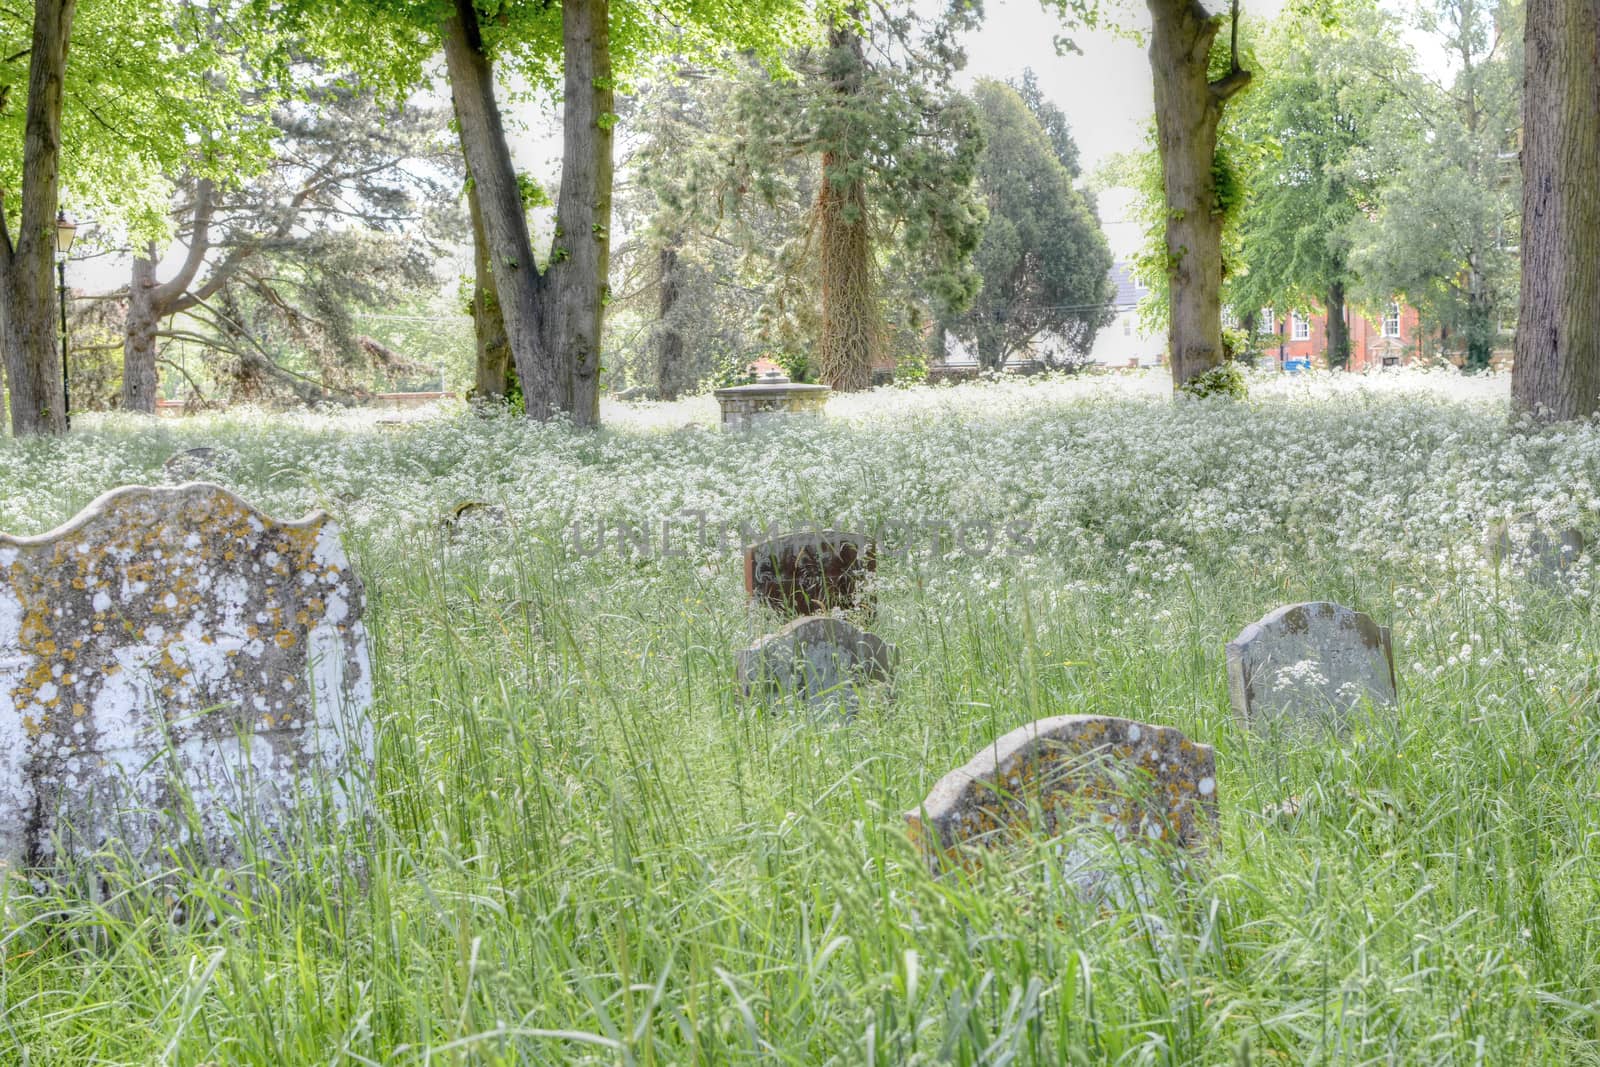 Grass and weeds smother the gravestones of a country graveyard